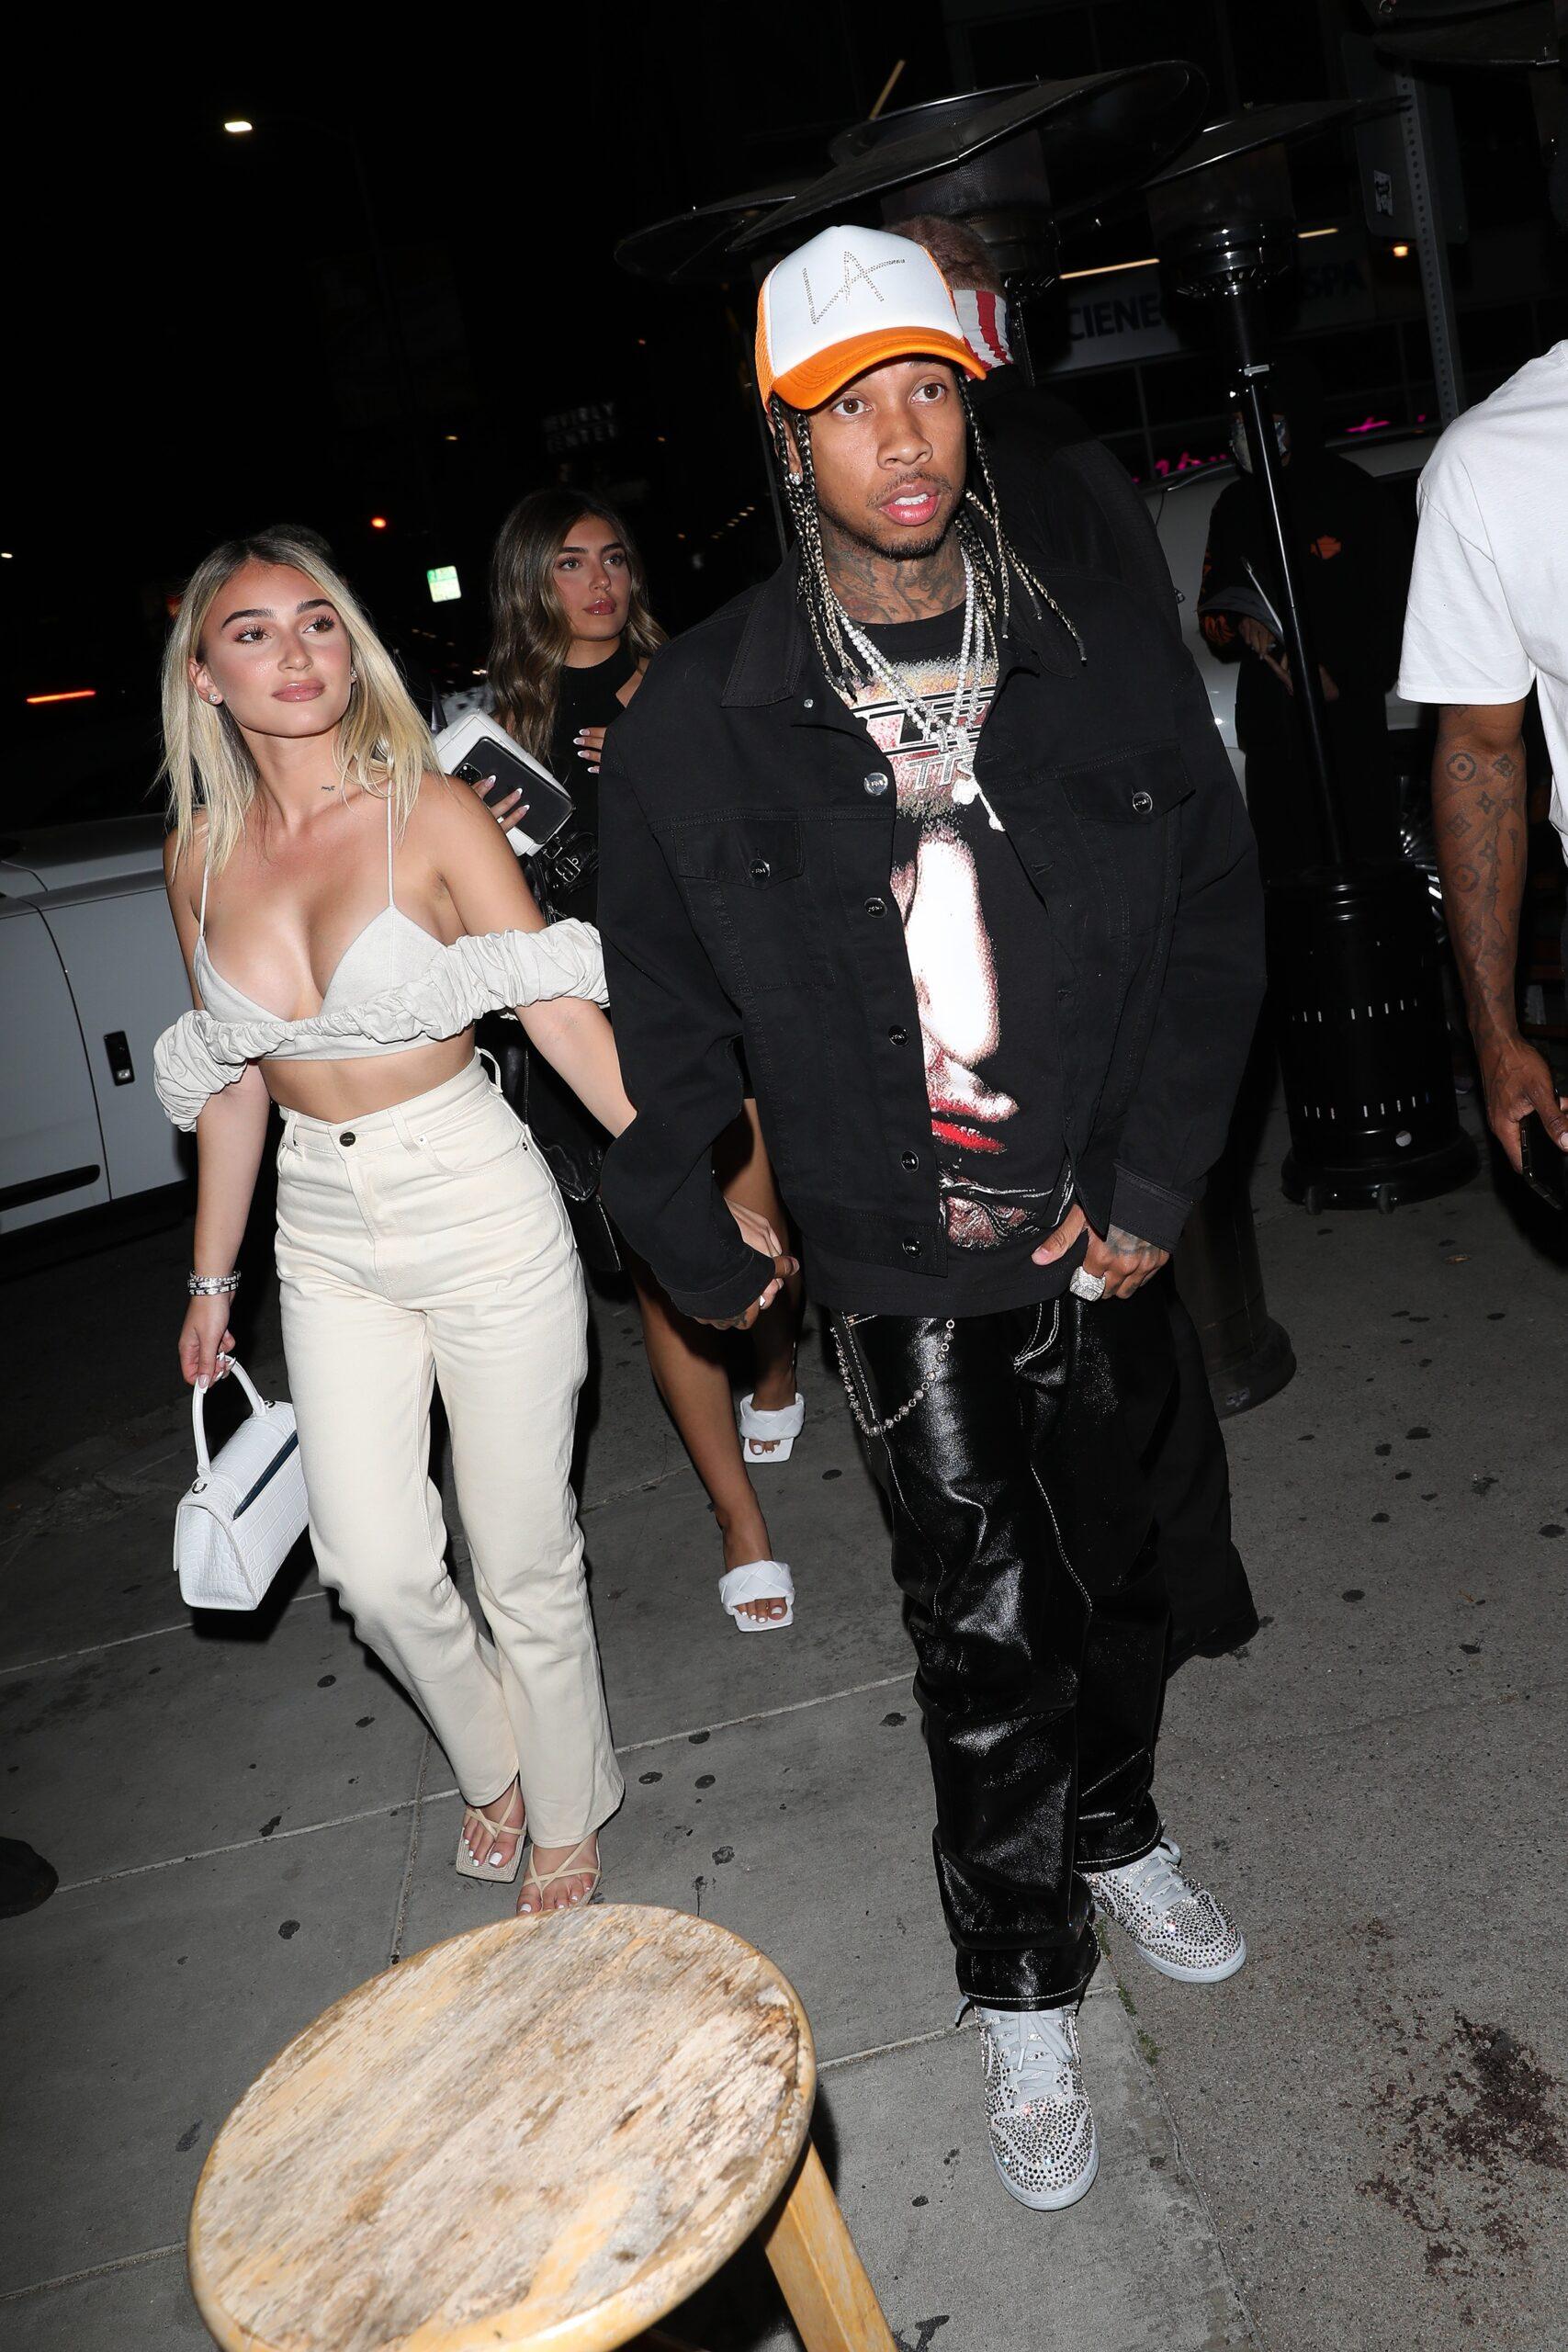 Tyga Accused Of Domestic Violence By Ex-Girlfriend Camaryn Swanson After Argument At His Home